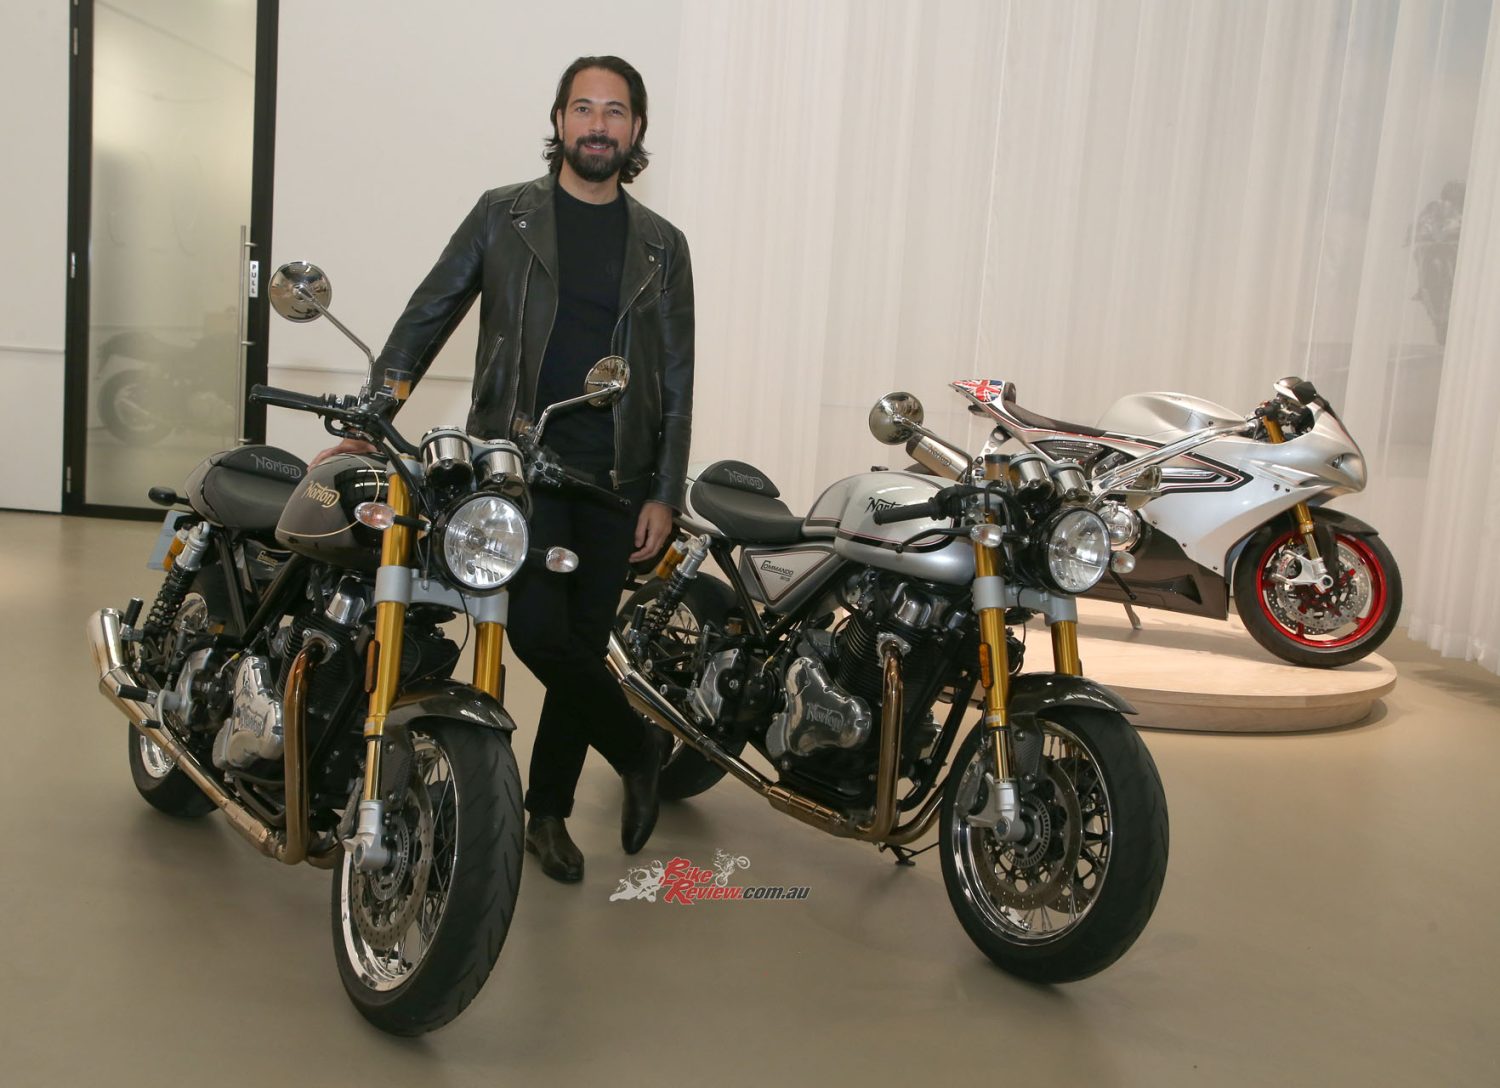 In June 2022 Christian Gladwell, 48, was appointed CCO/Chief Commercial Officer of Norton Motorcycles, ready to relaunch the brand under new ownership.